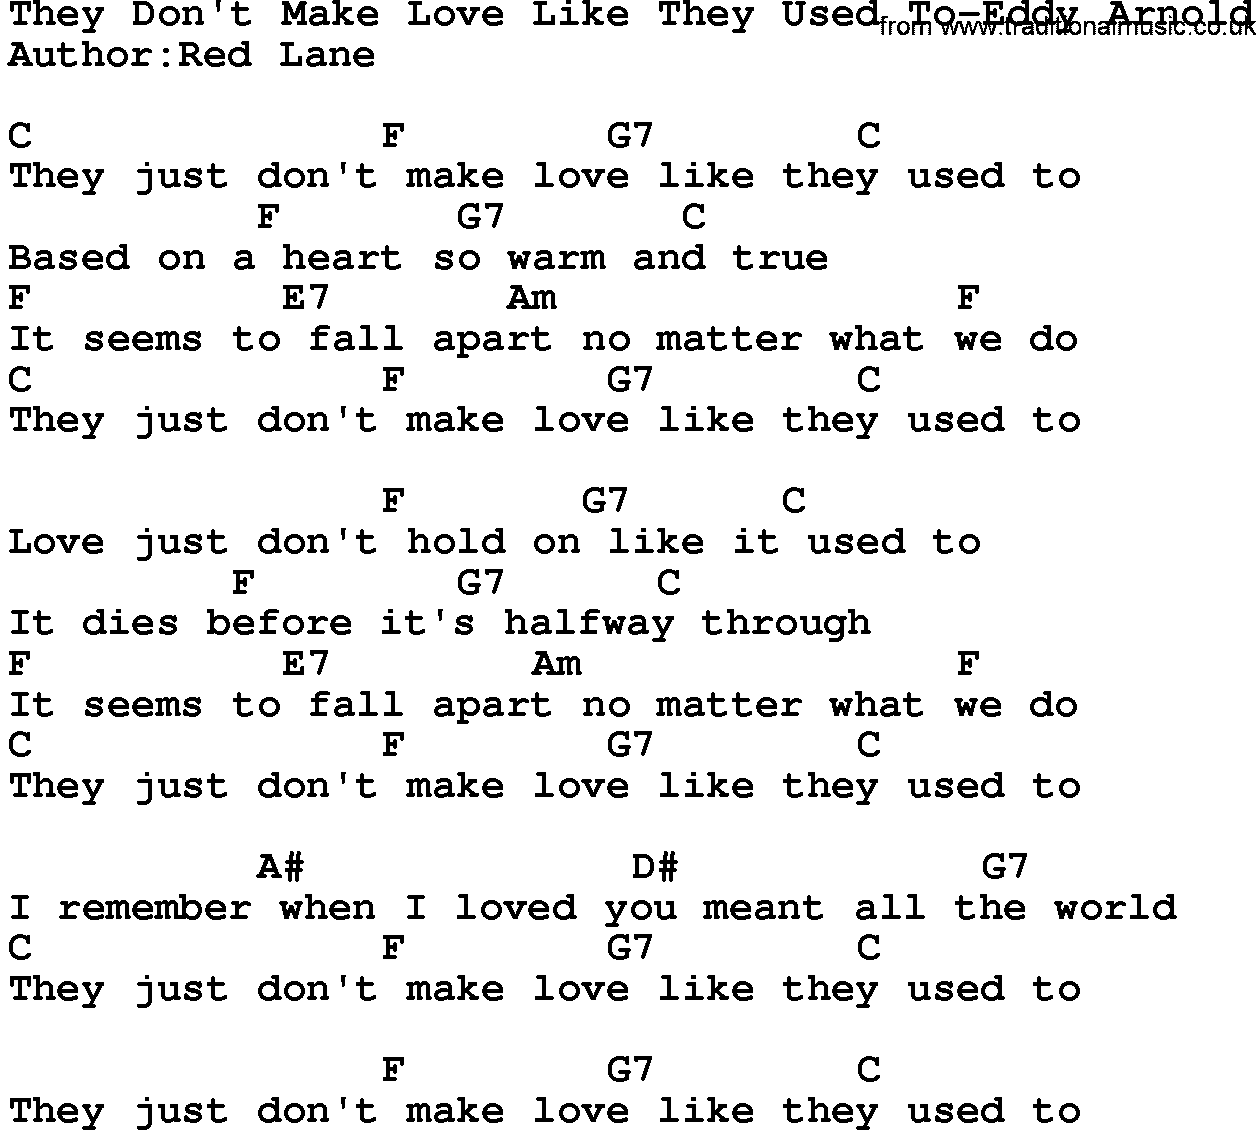 Country music song: They Don't Make Love Like They Used To-Eddy Arnold lyrics and chords